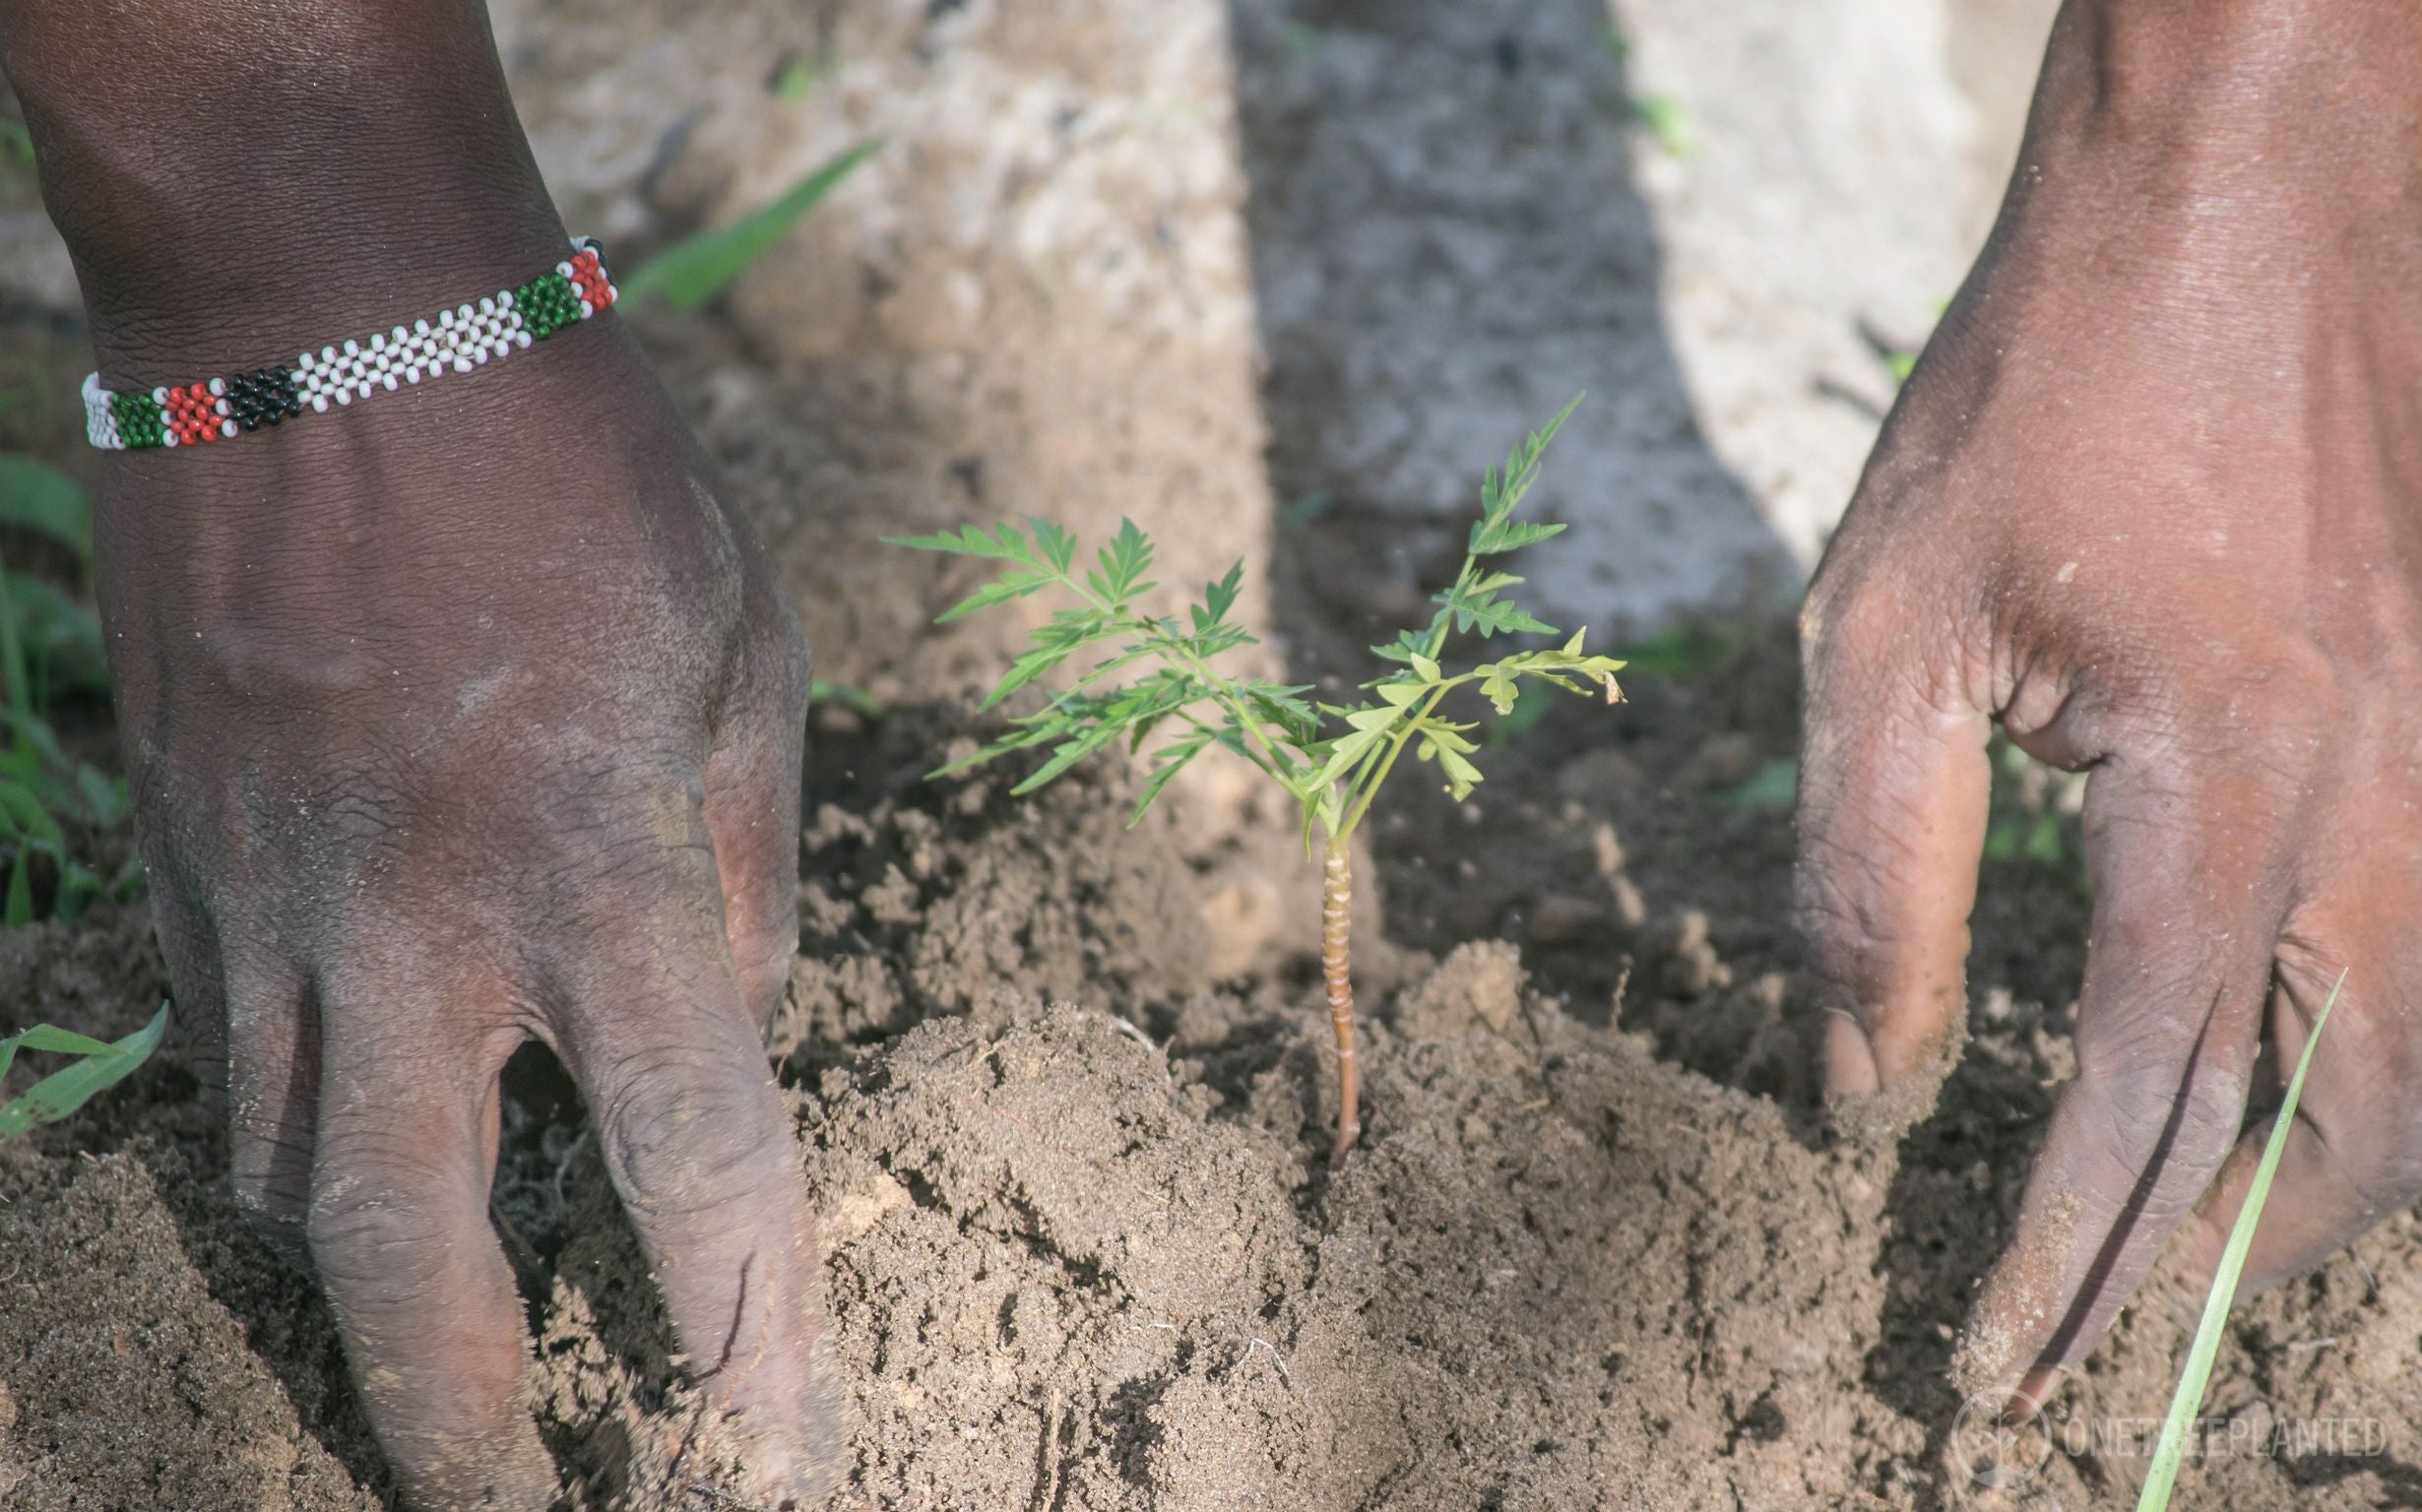 One Tree Planted – Offsetting Carbon Emissions